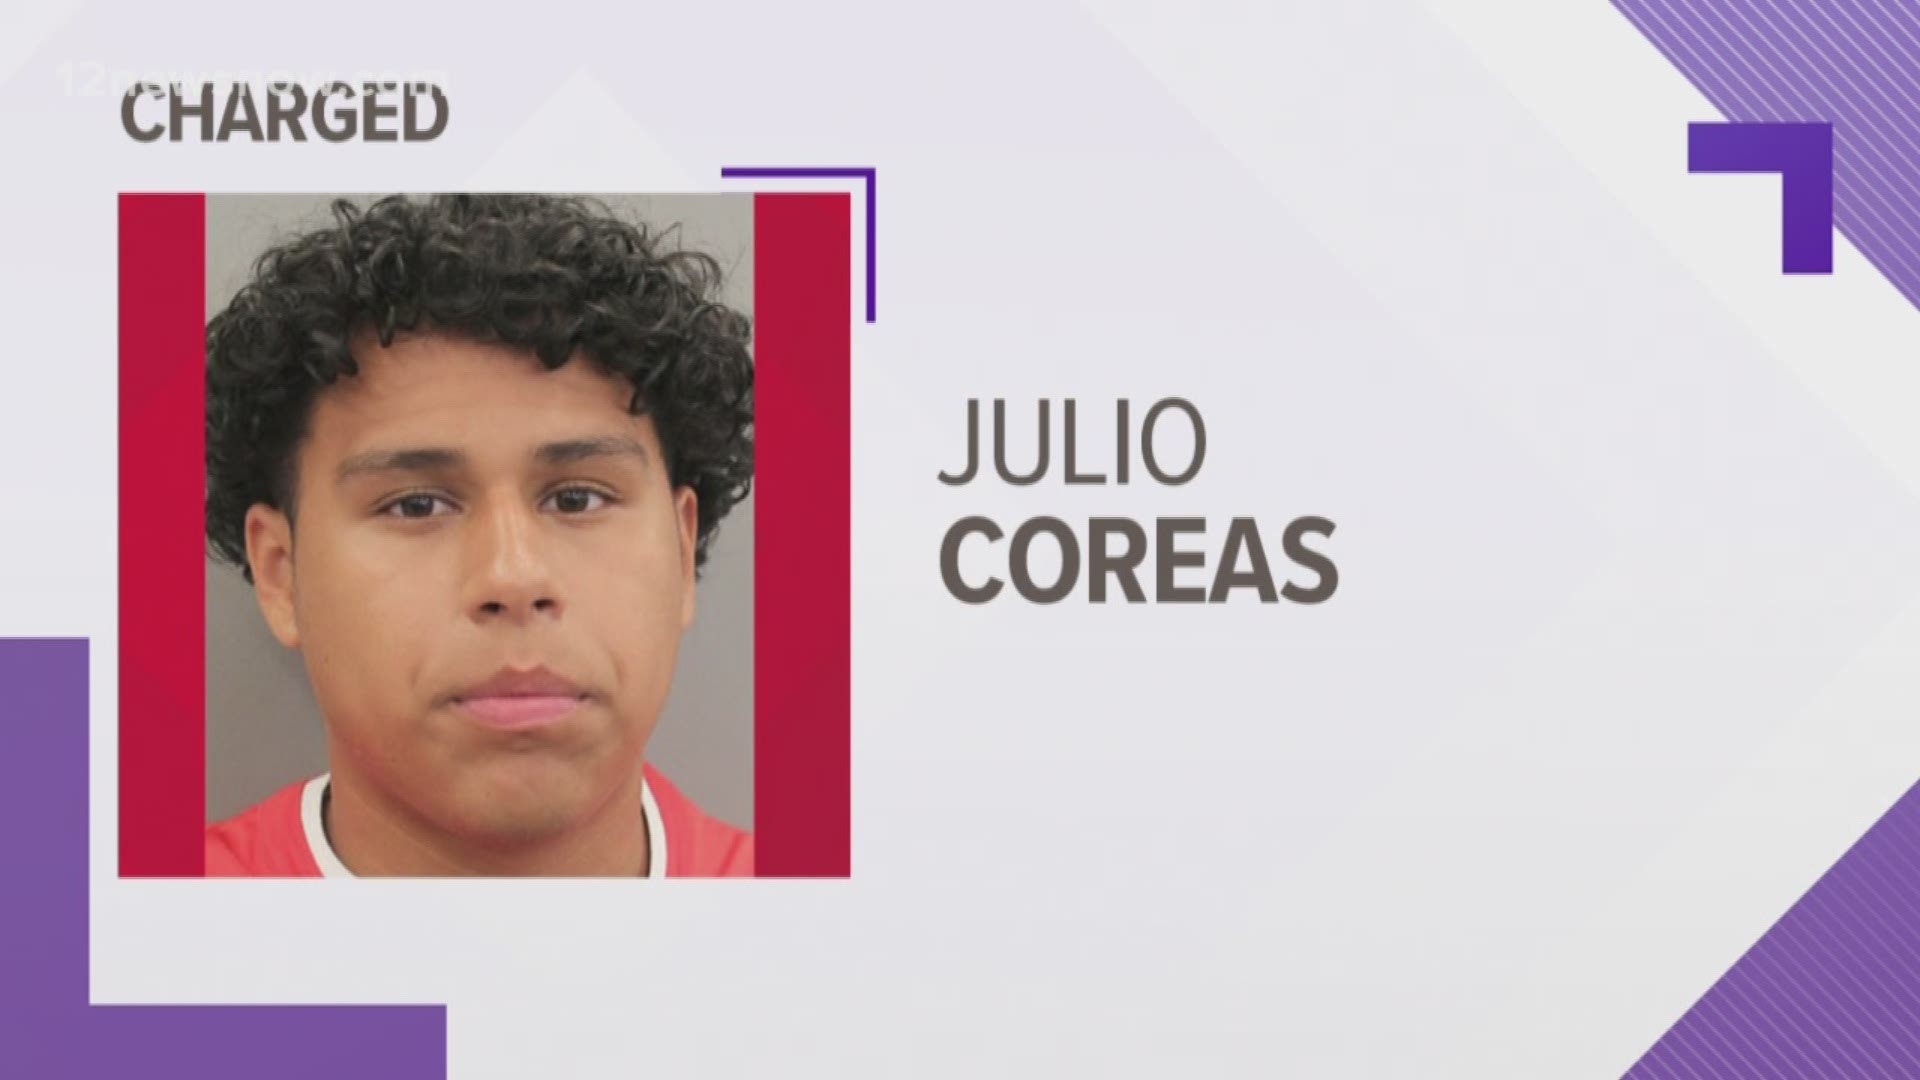 Julio Coreas could face up to 6 months in jail.